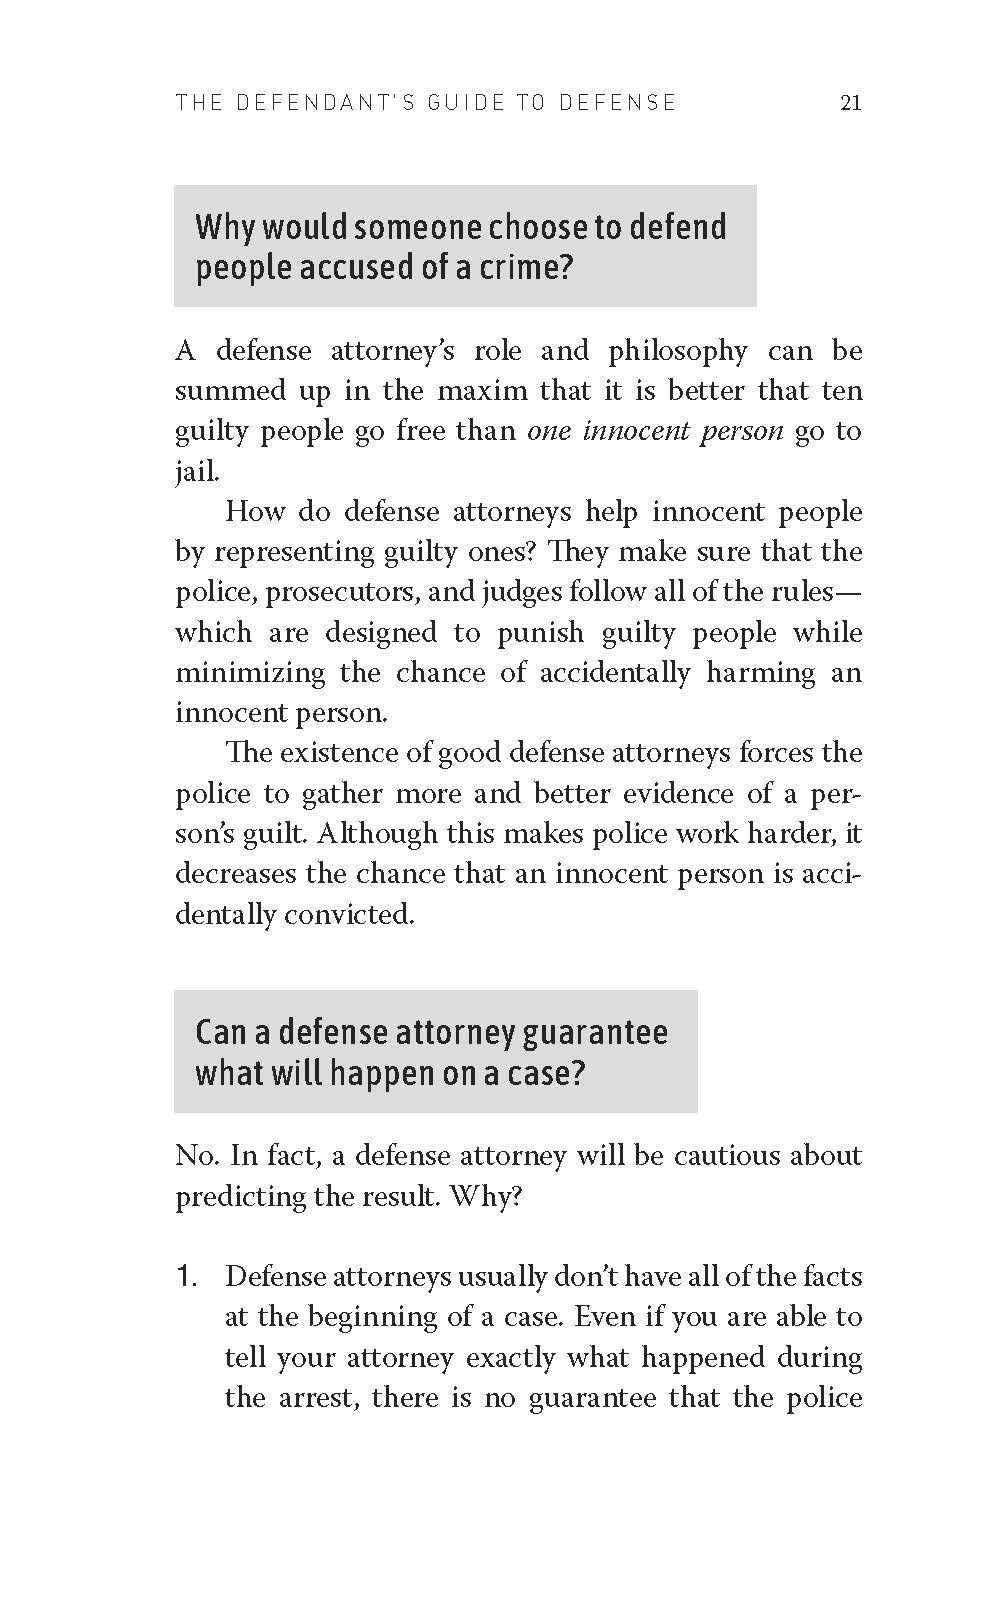 Sample_of_Defendant_s_Guide_to_Defense_Page_23.jpg